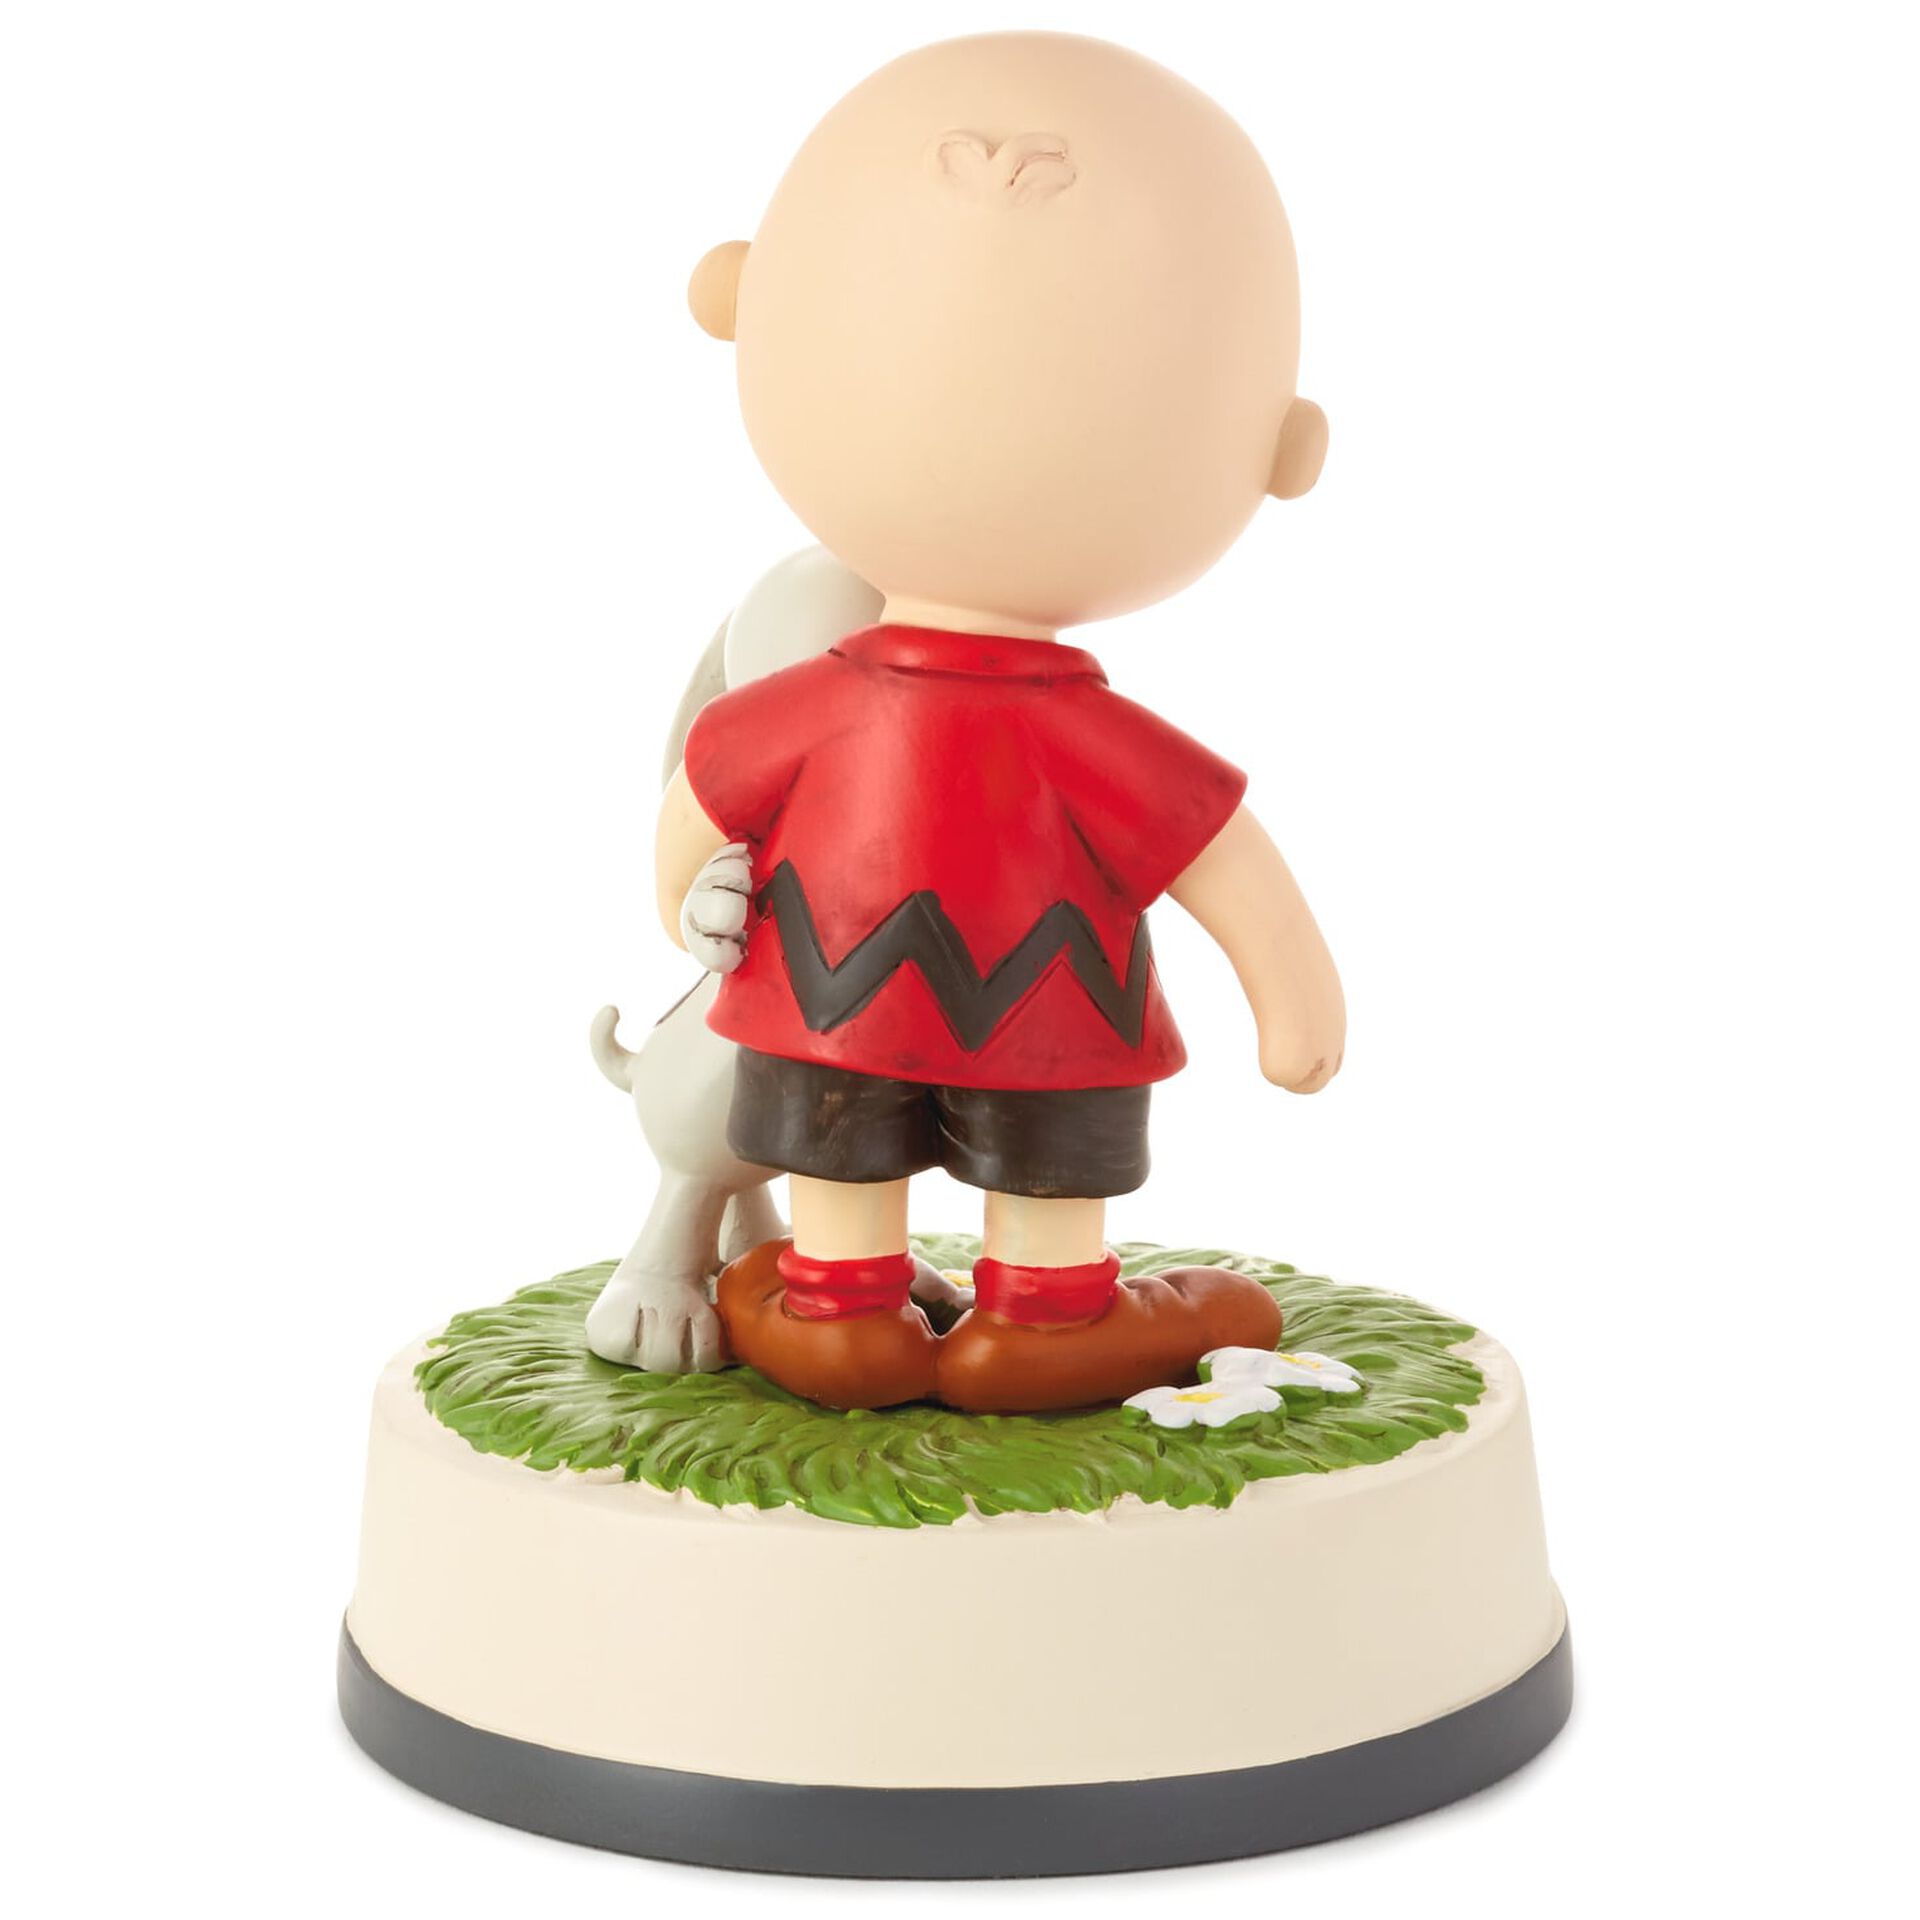 Peanuts® Charlie Brown and Snoopy Together Figurine, 4.75